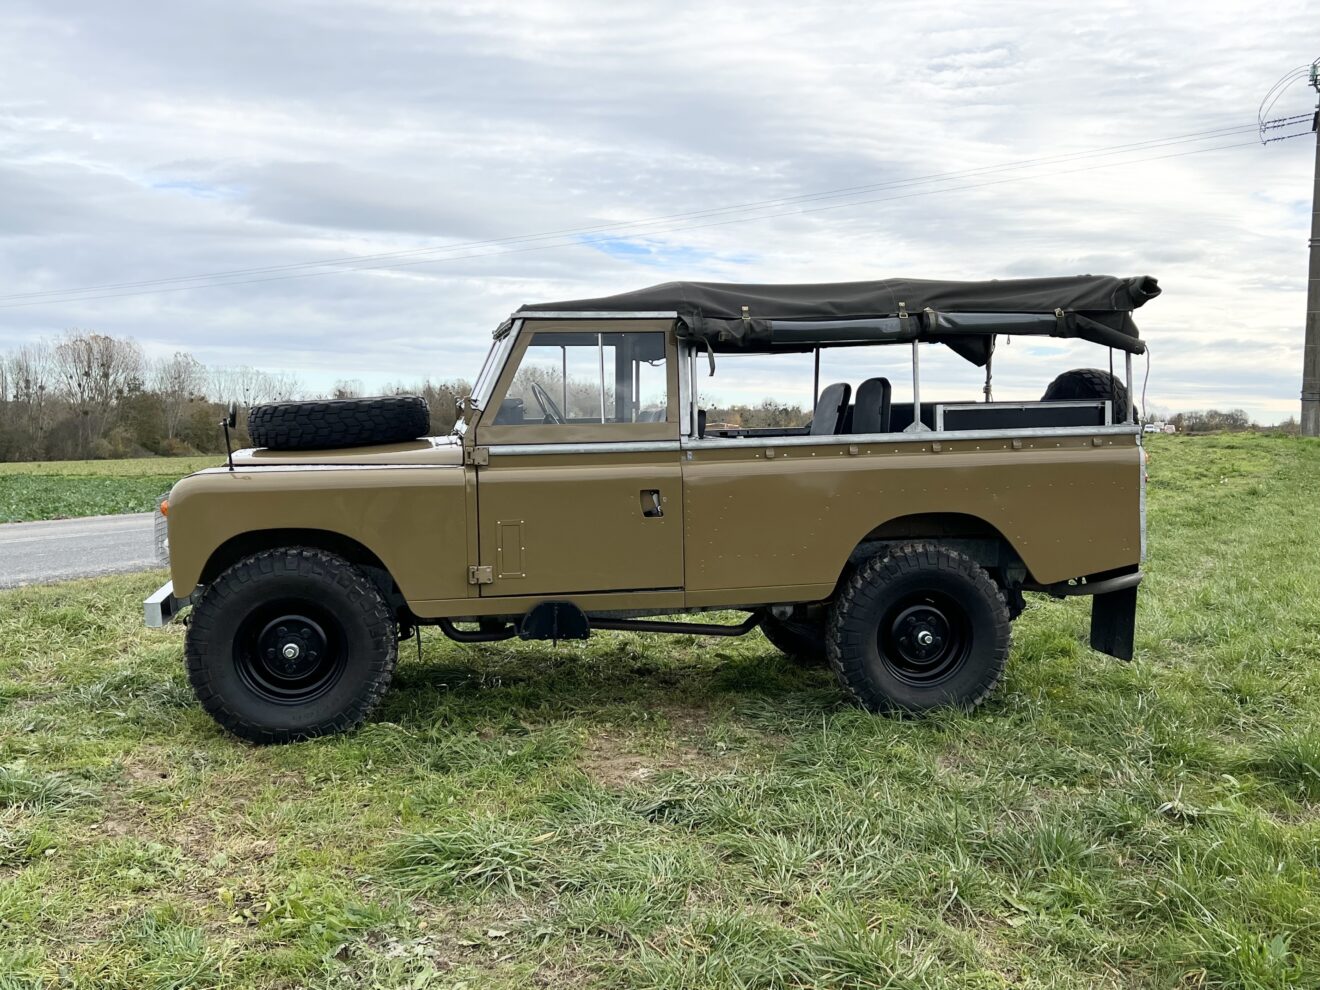 LAND ROVER SÉRIE III 109 6 CYL ESSENCE CABRIOLET, 9 PLACES 1972